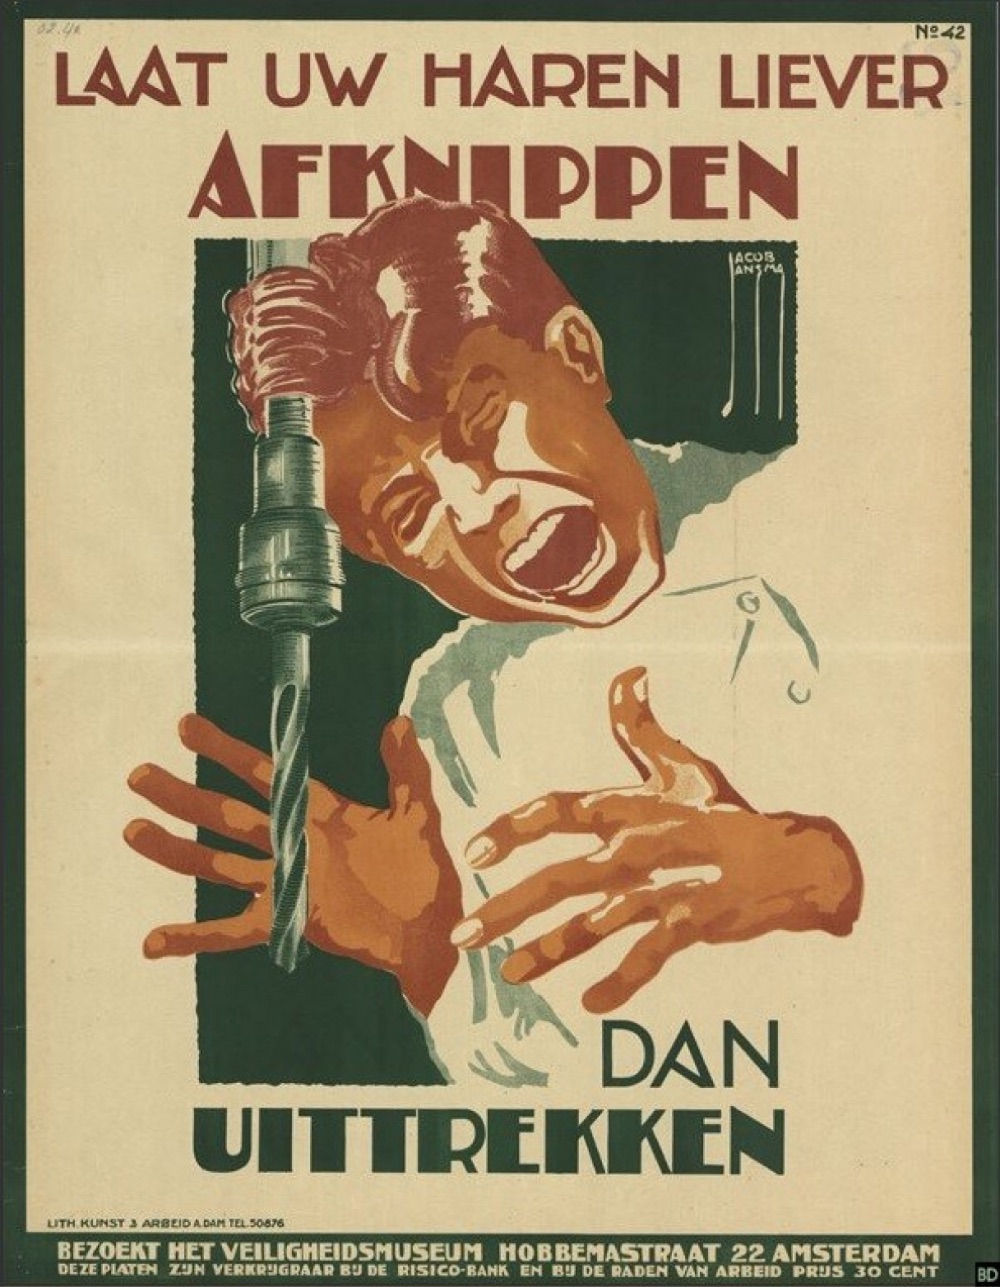 vintage Dutch safety poster showing someone getting their hair caught in a drill